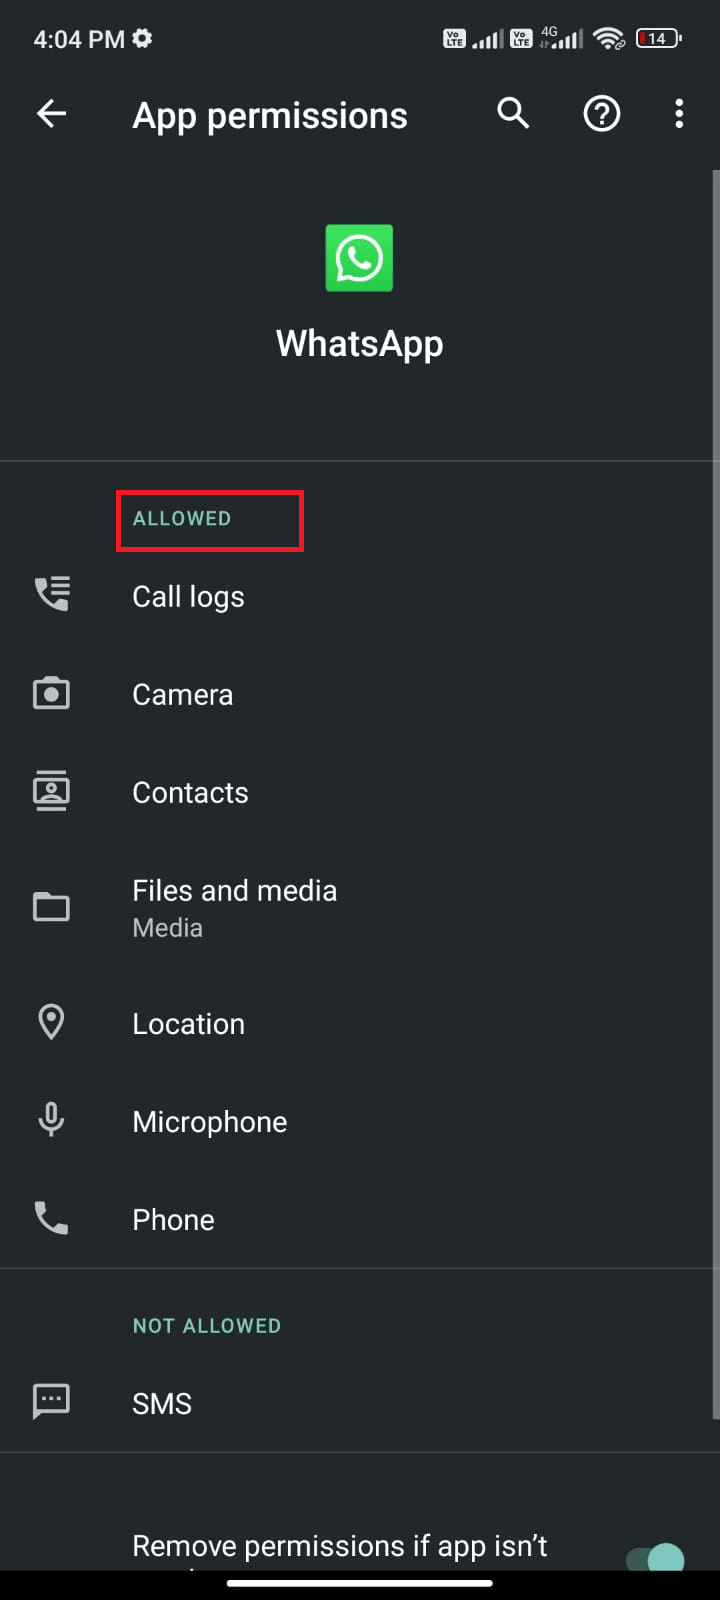 look for the list of permissions granted for WhatsApp under the ALLOWED menu